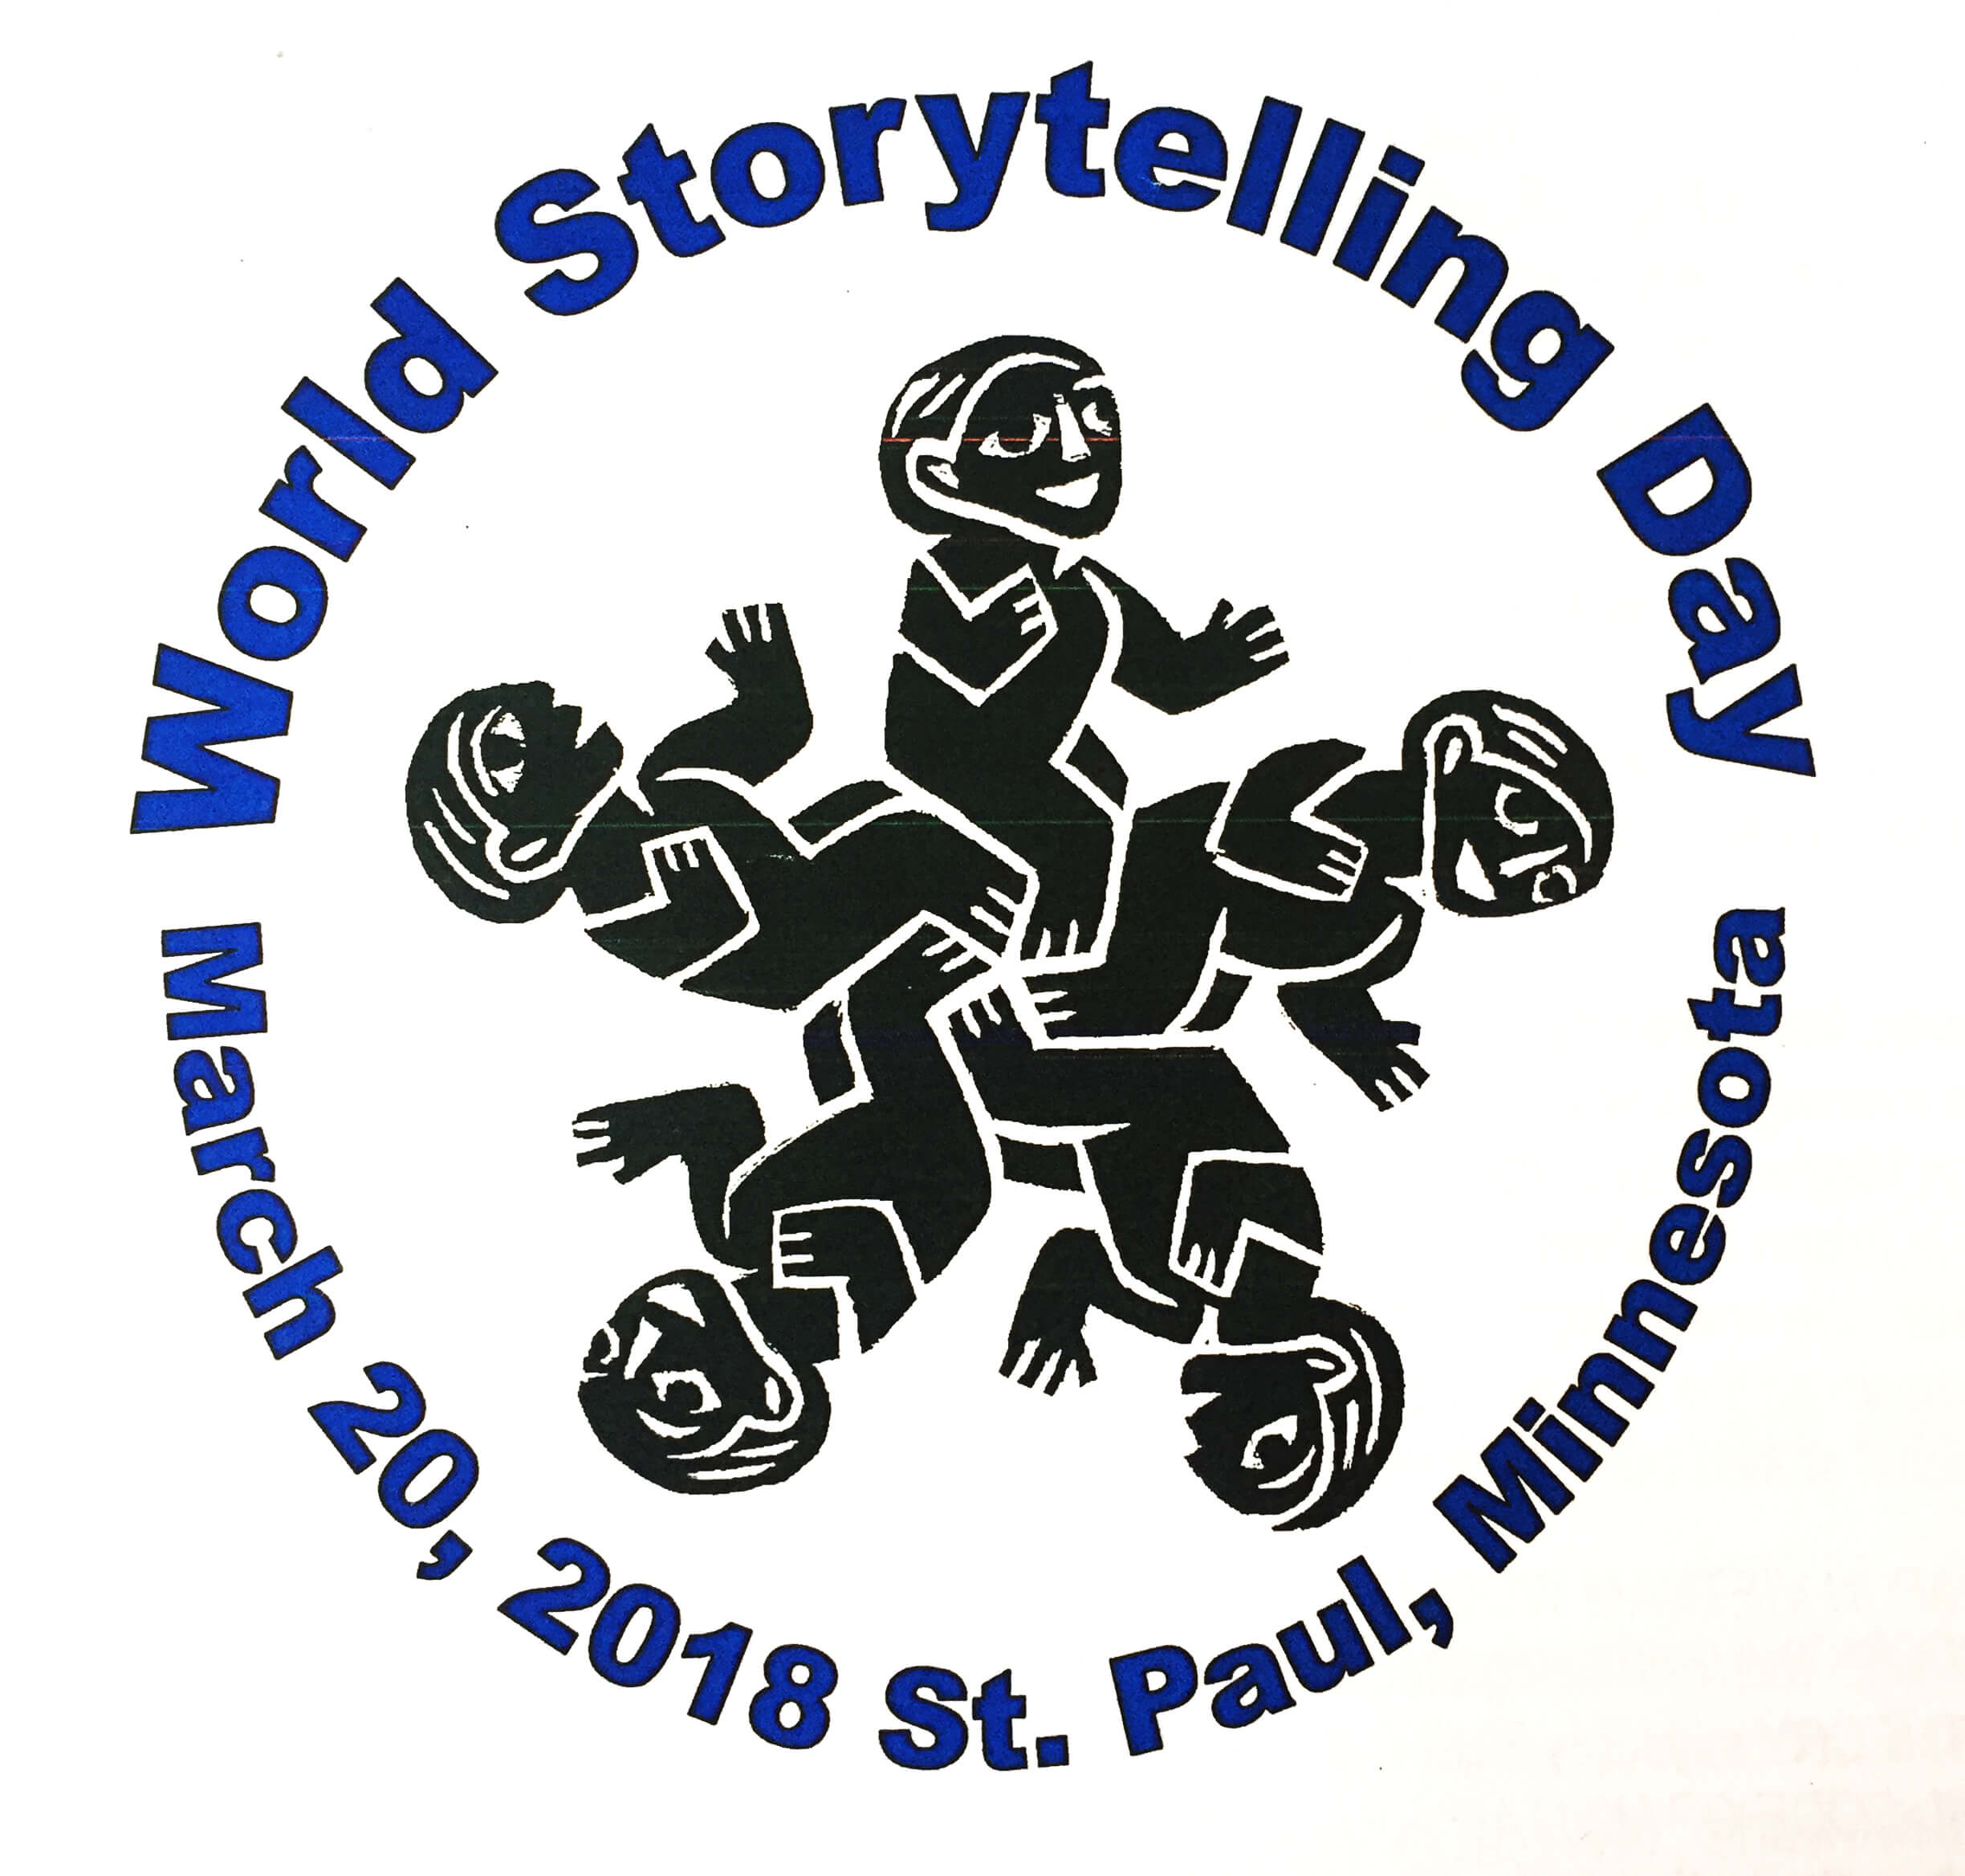 World Storytelling Day logo with illustration of people in a circle